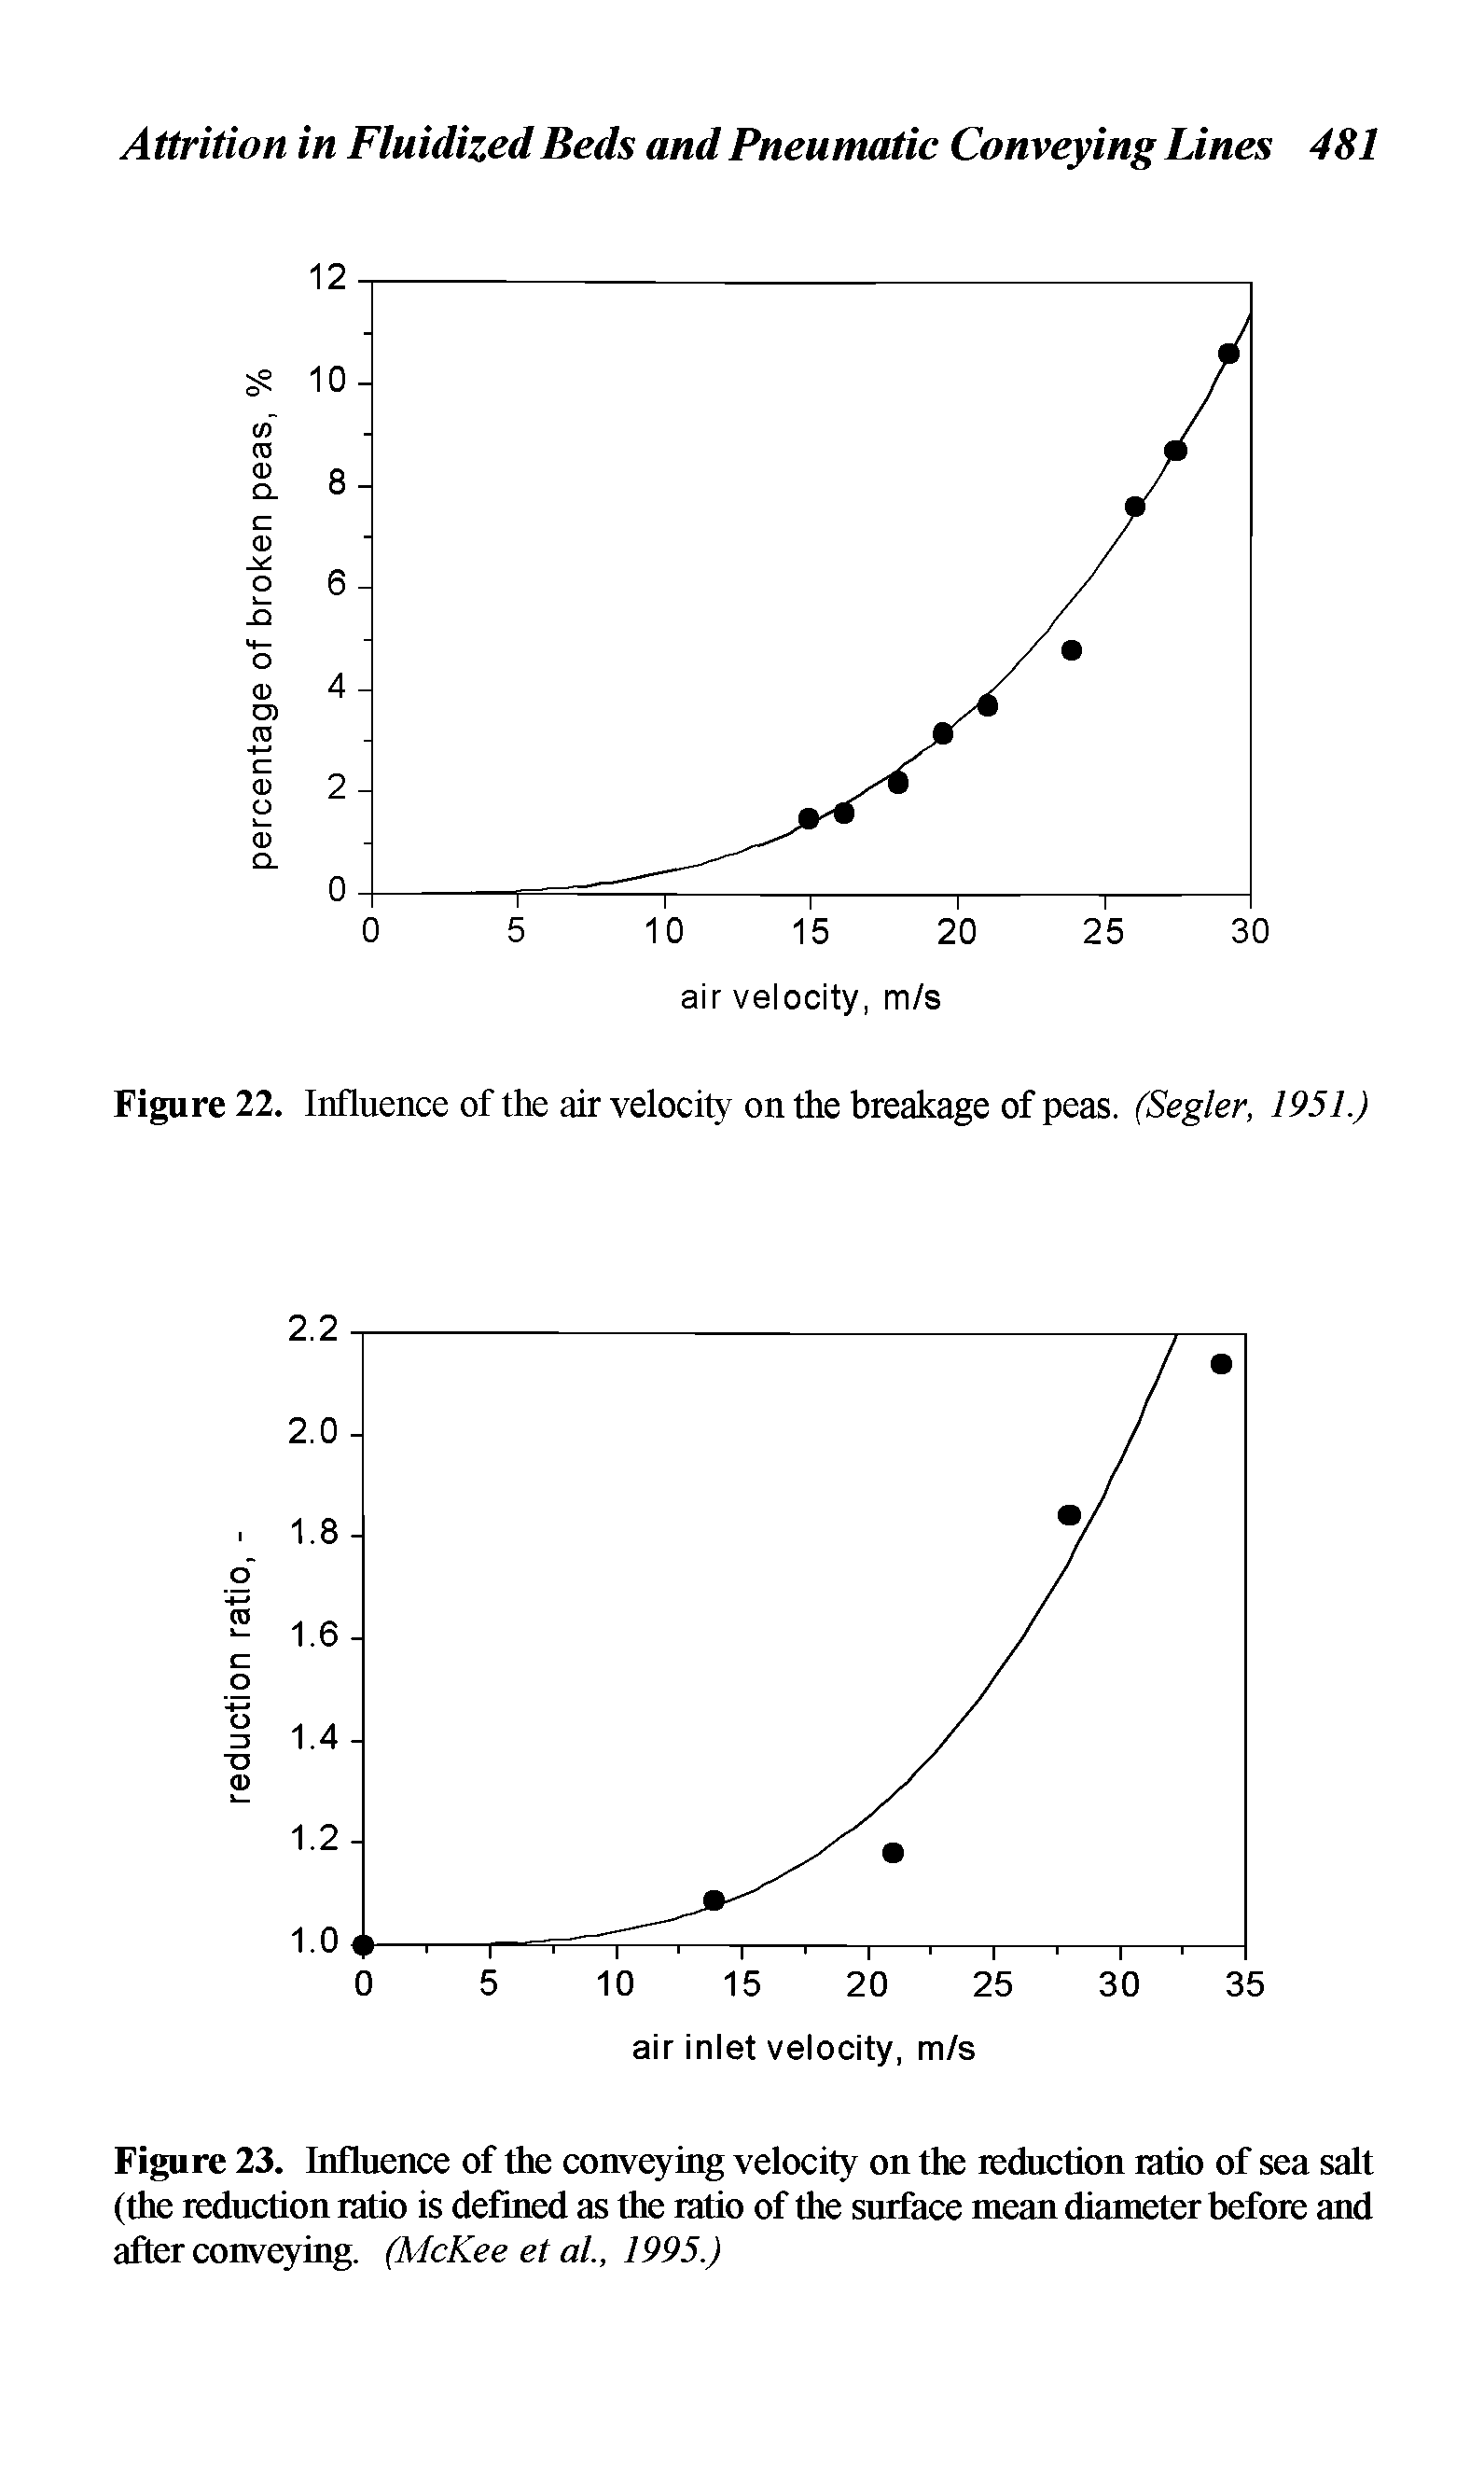 Figure 23. Influence of the conveying velocity on the reduction ratio of sea salt (the reduction ratio is defined as the ratio of the surface mean diameter before and after conveying. (McKee et al., 1995.)...